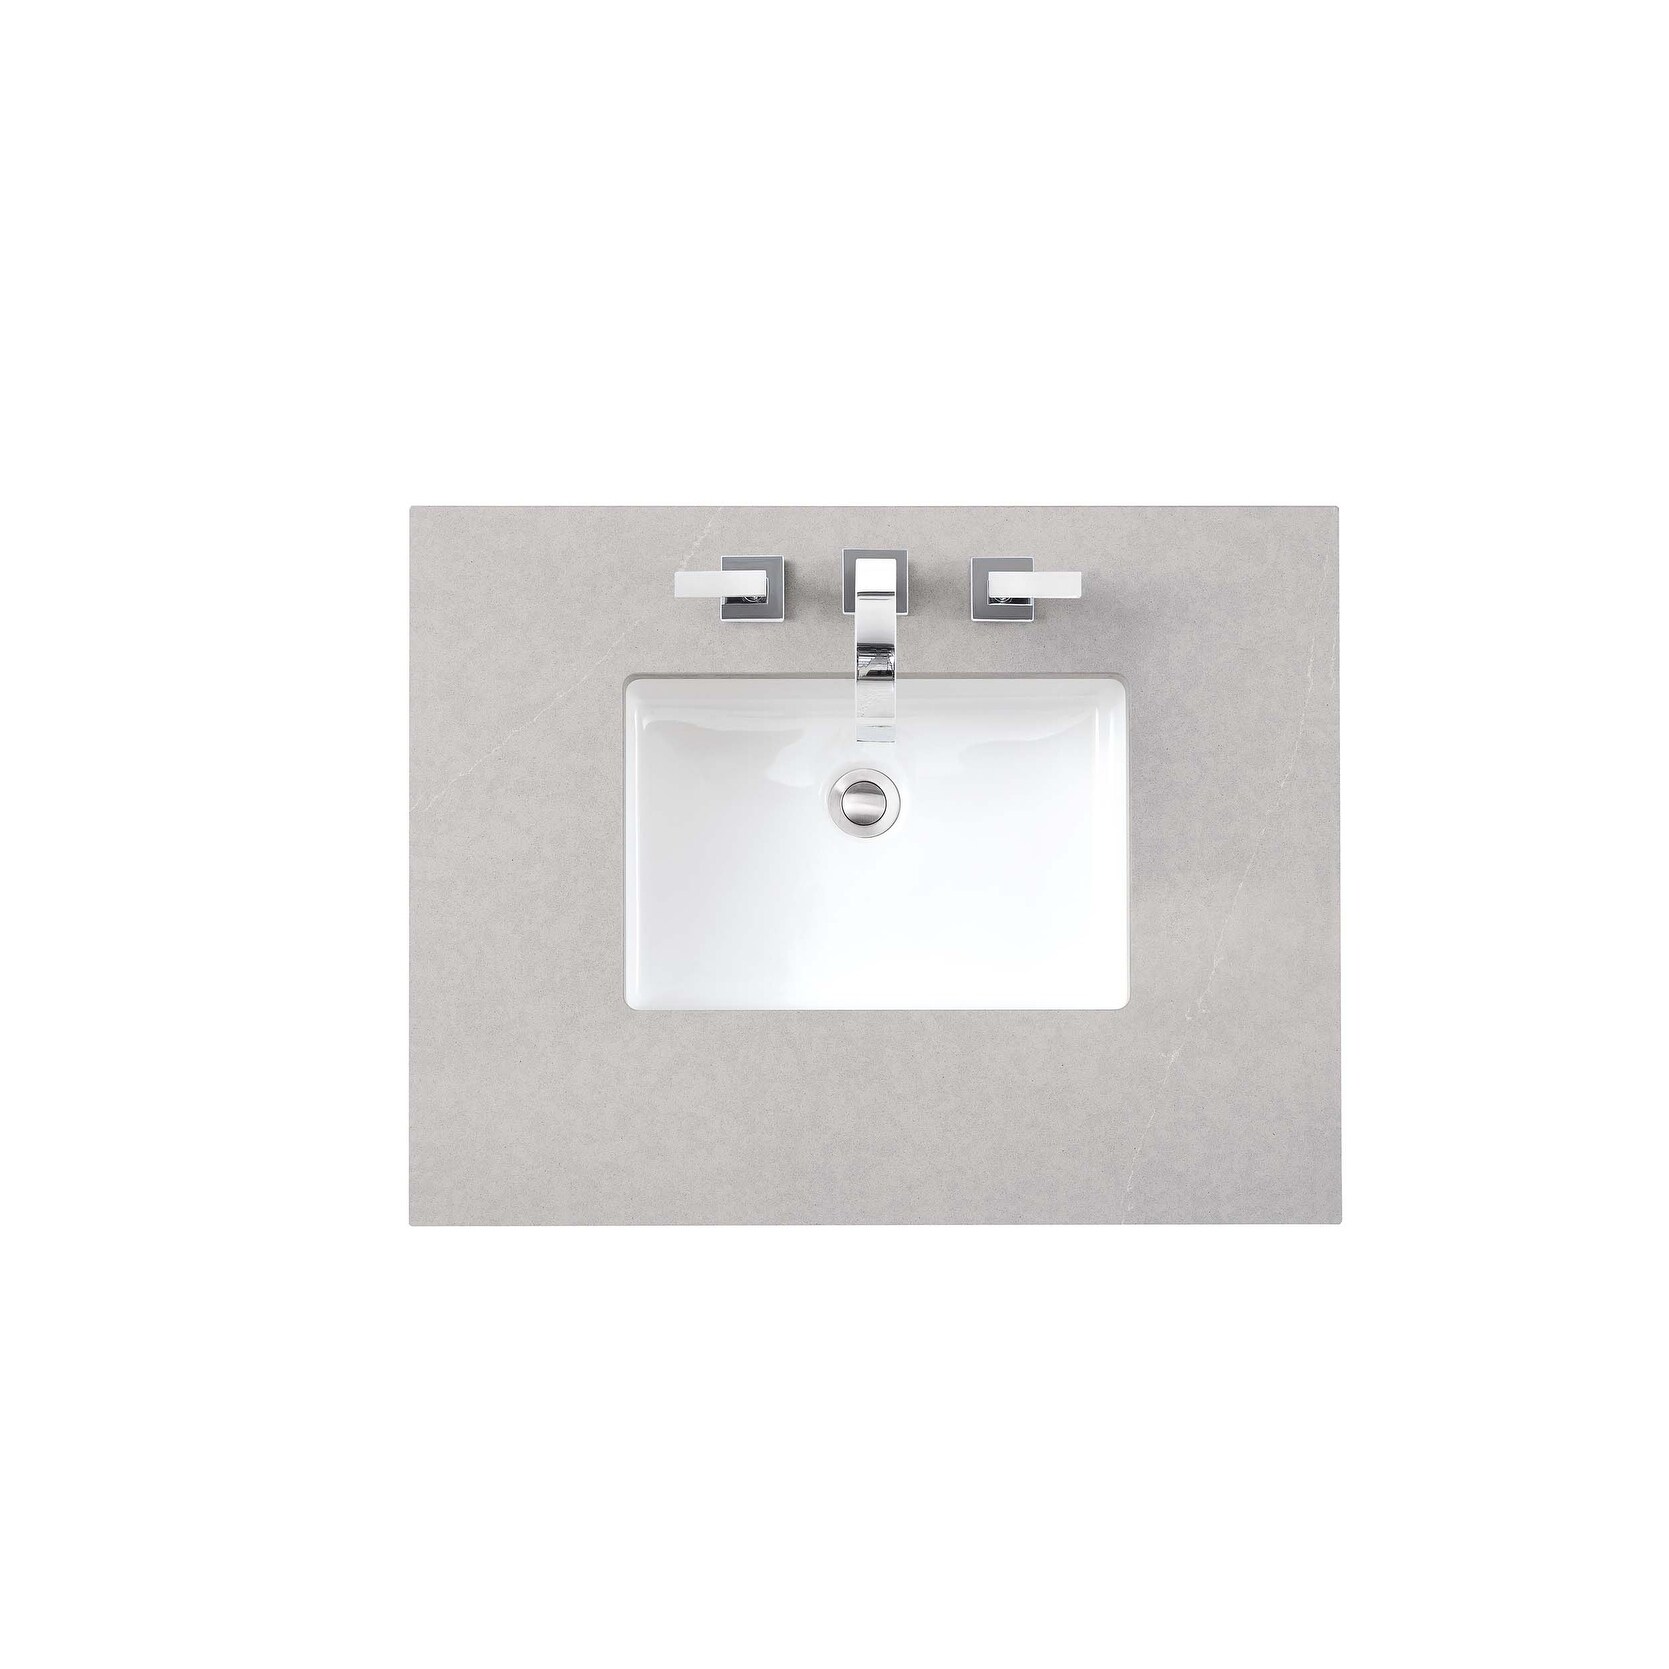 https://ak1.ostkcdn.com/images/products/is/images/direct/eb5f60d3db9eeadc432898375f17082663a98f25/James-Martin-Vanities-Chicago-72%22-Double-Vanity%2C-Whitewashed-Walnut.jpg